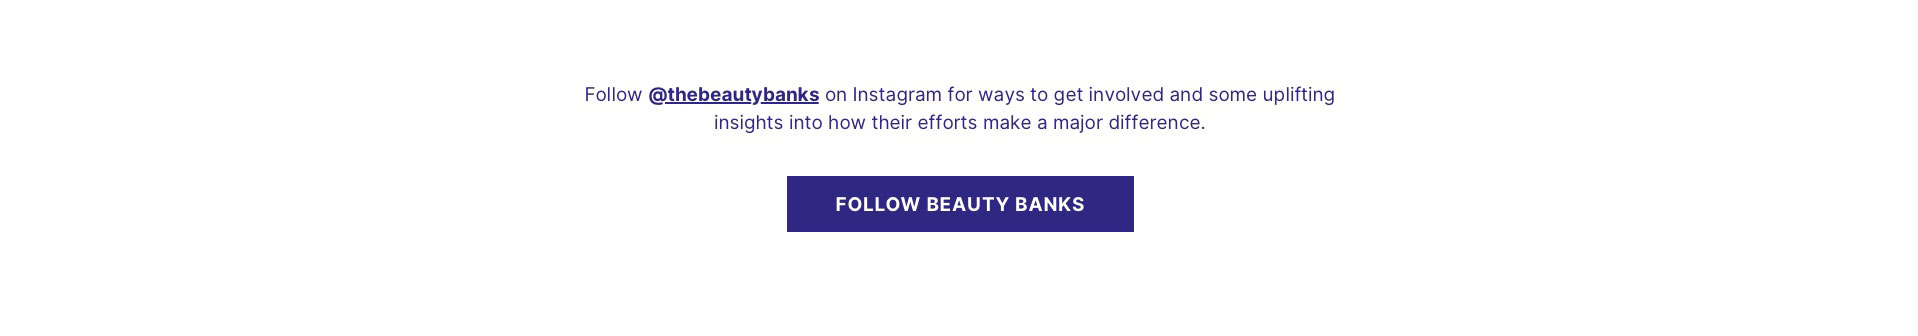 follow @thebeautybanks on instagram for ways to get involved and some uplifting insights into how their effort make a major difference.